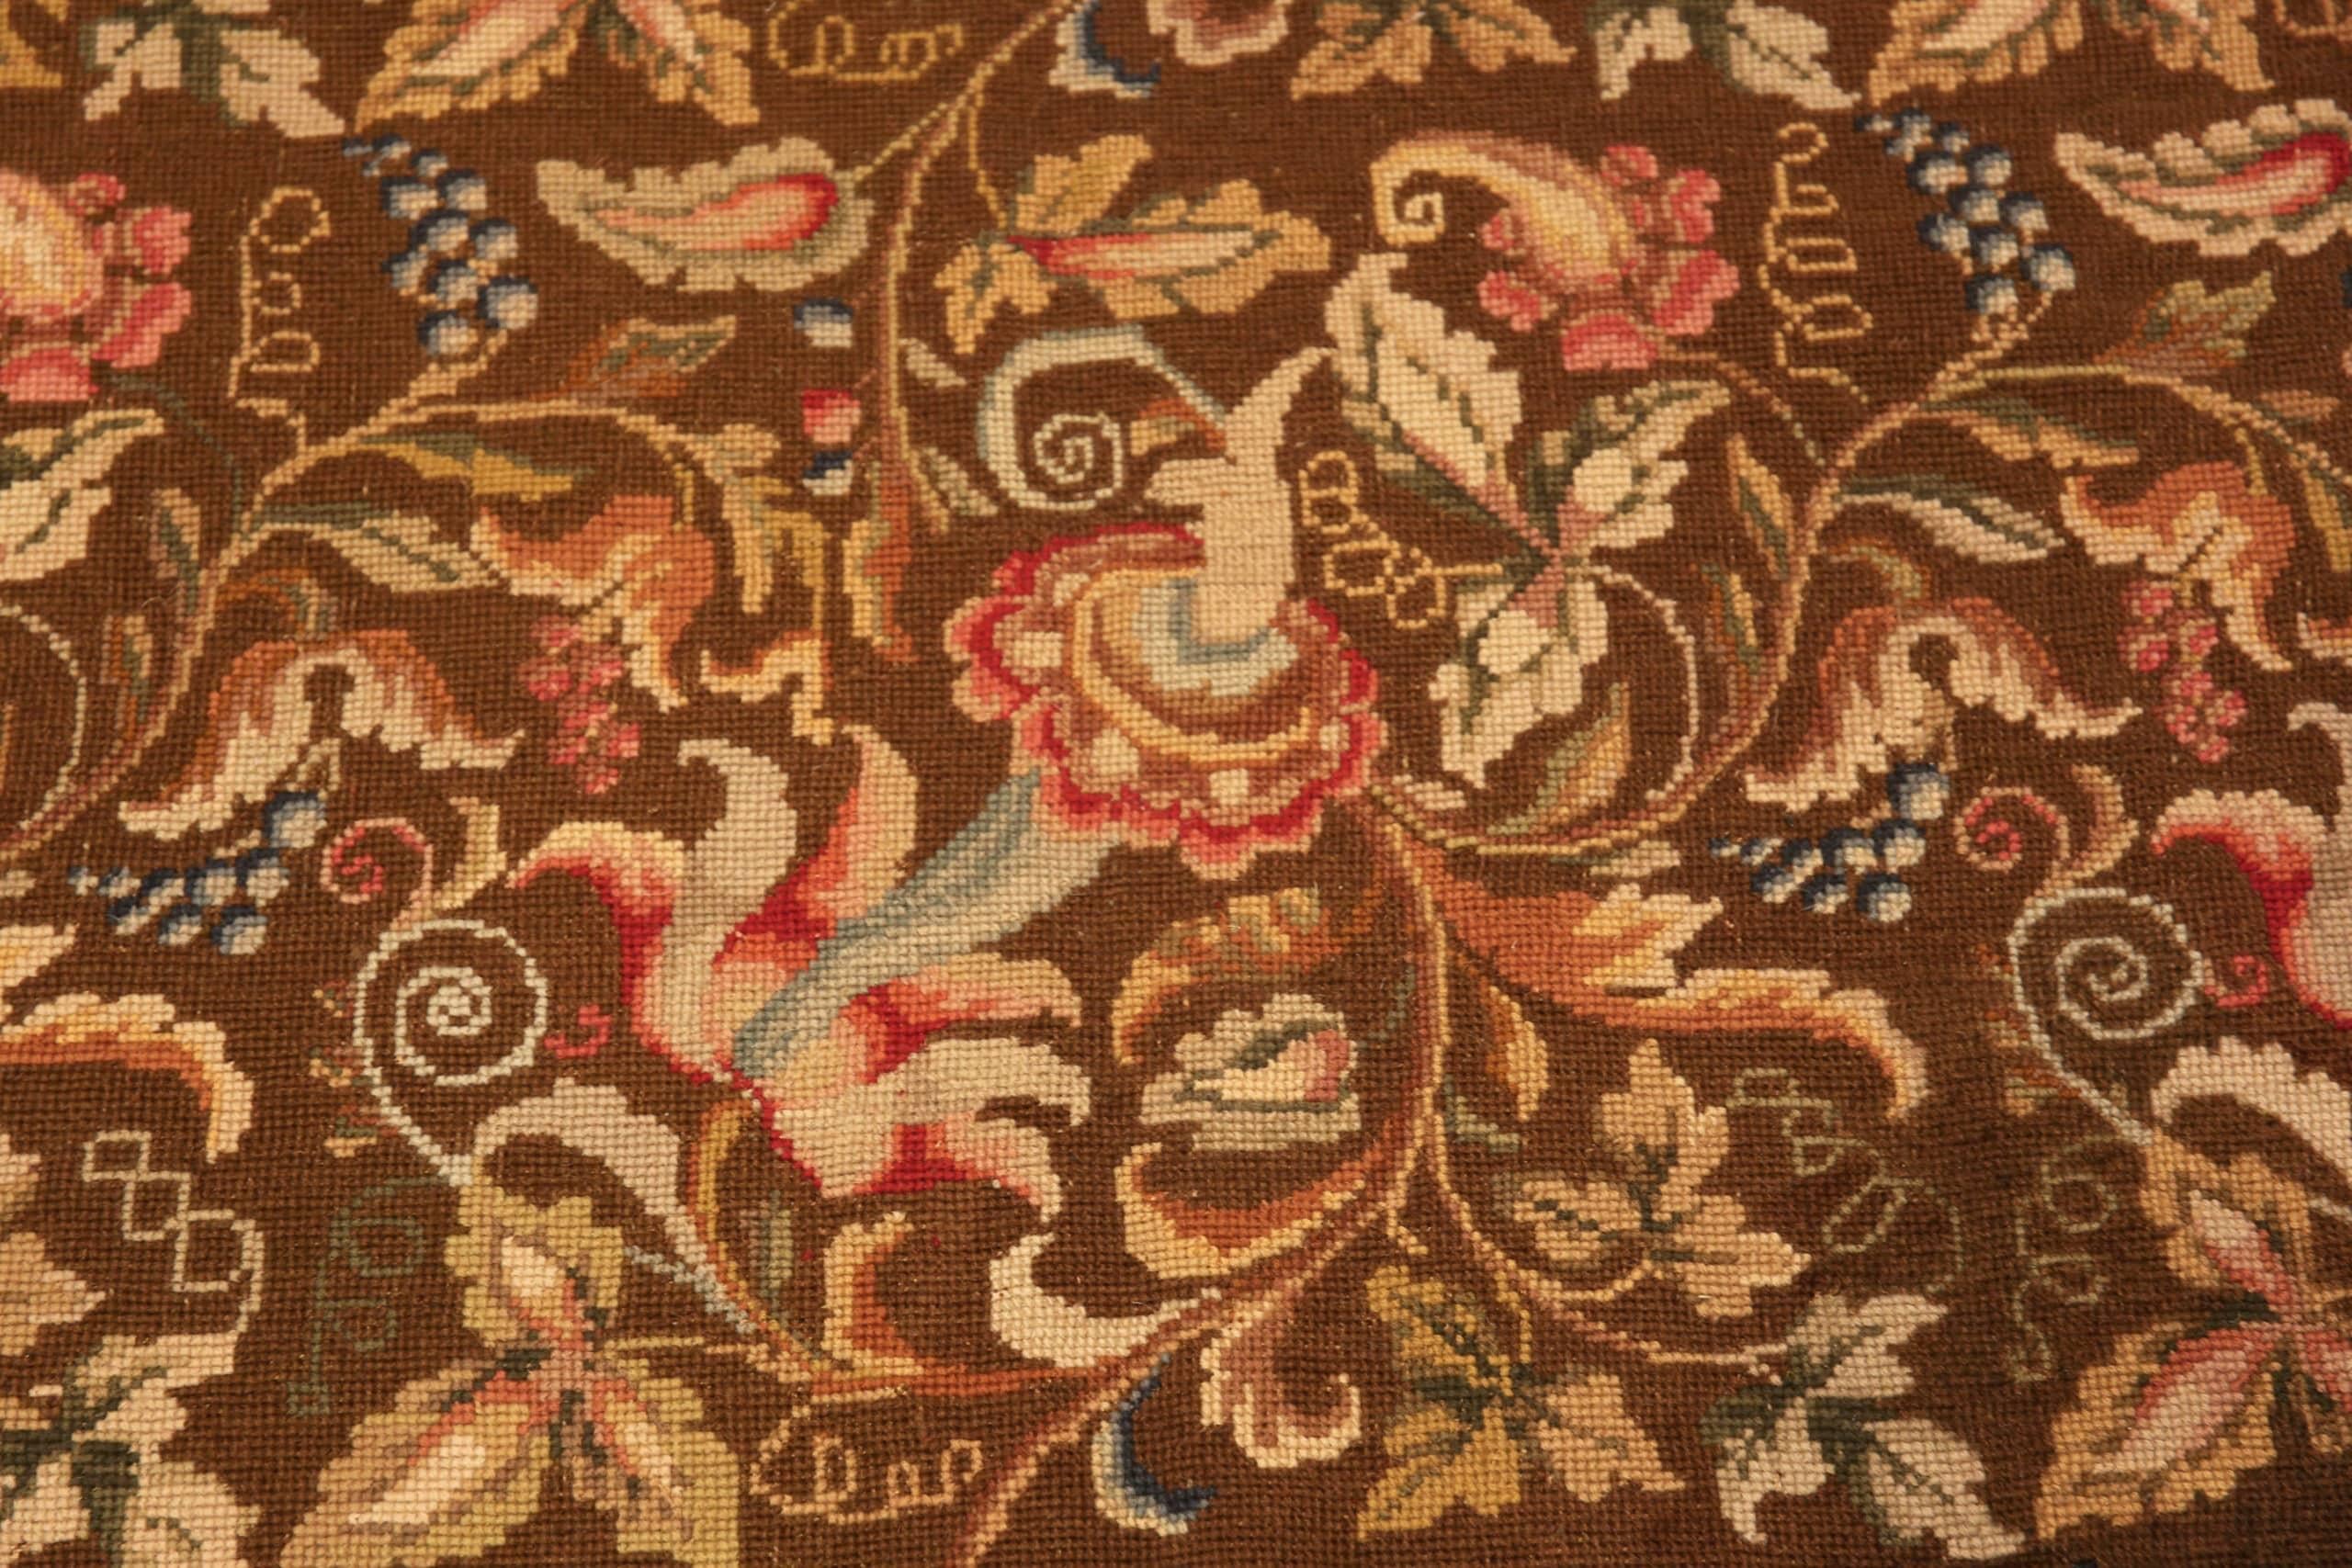 Wool Floral Design Antique English Needlepoint Flat Weave Area Rug 6'3